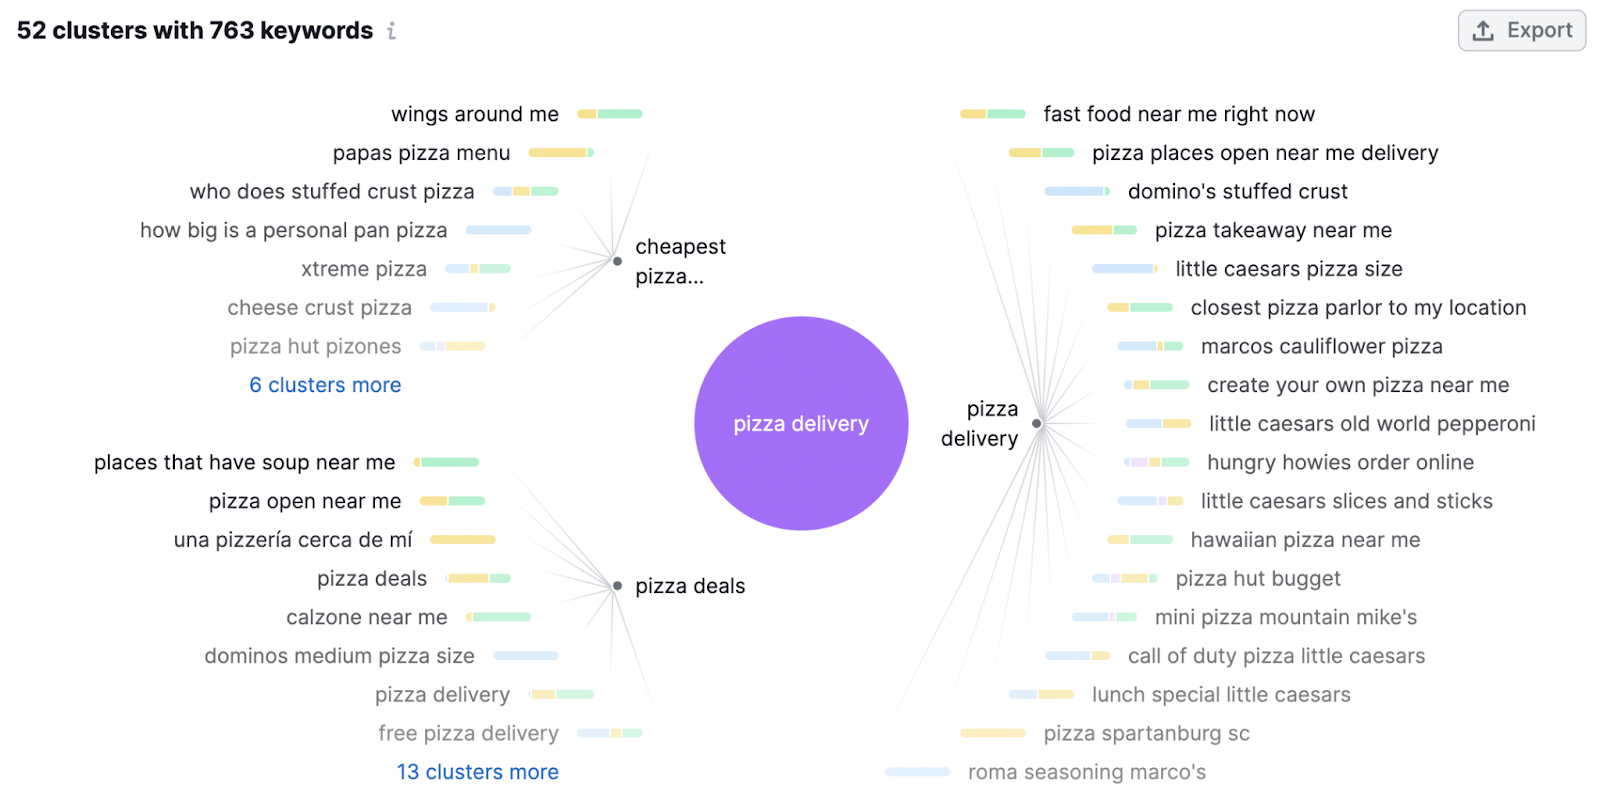 A caput   representation  for "pizza delivery" keyword